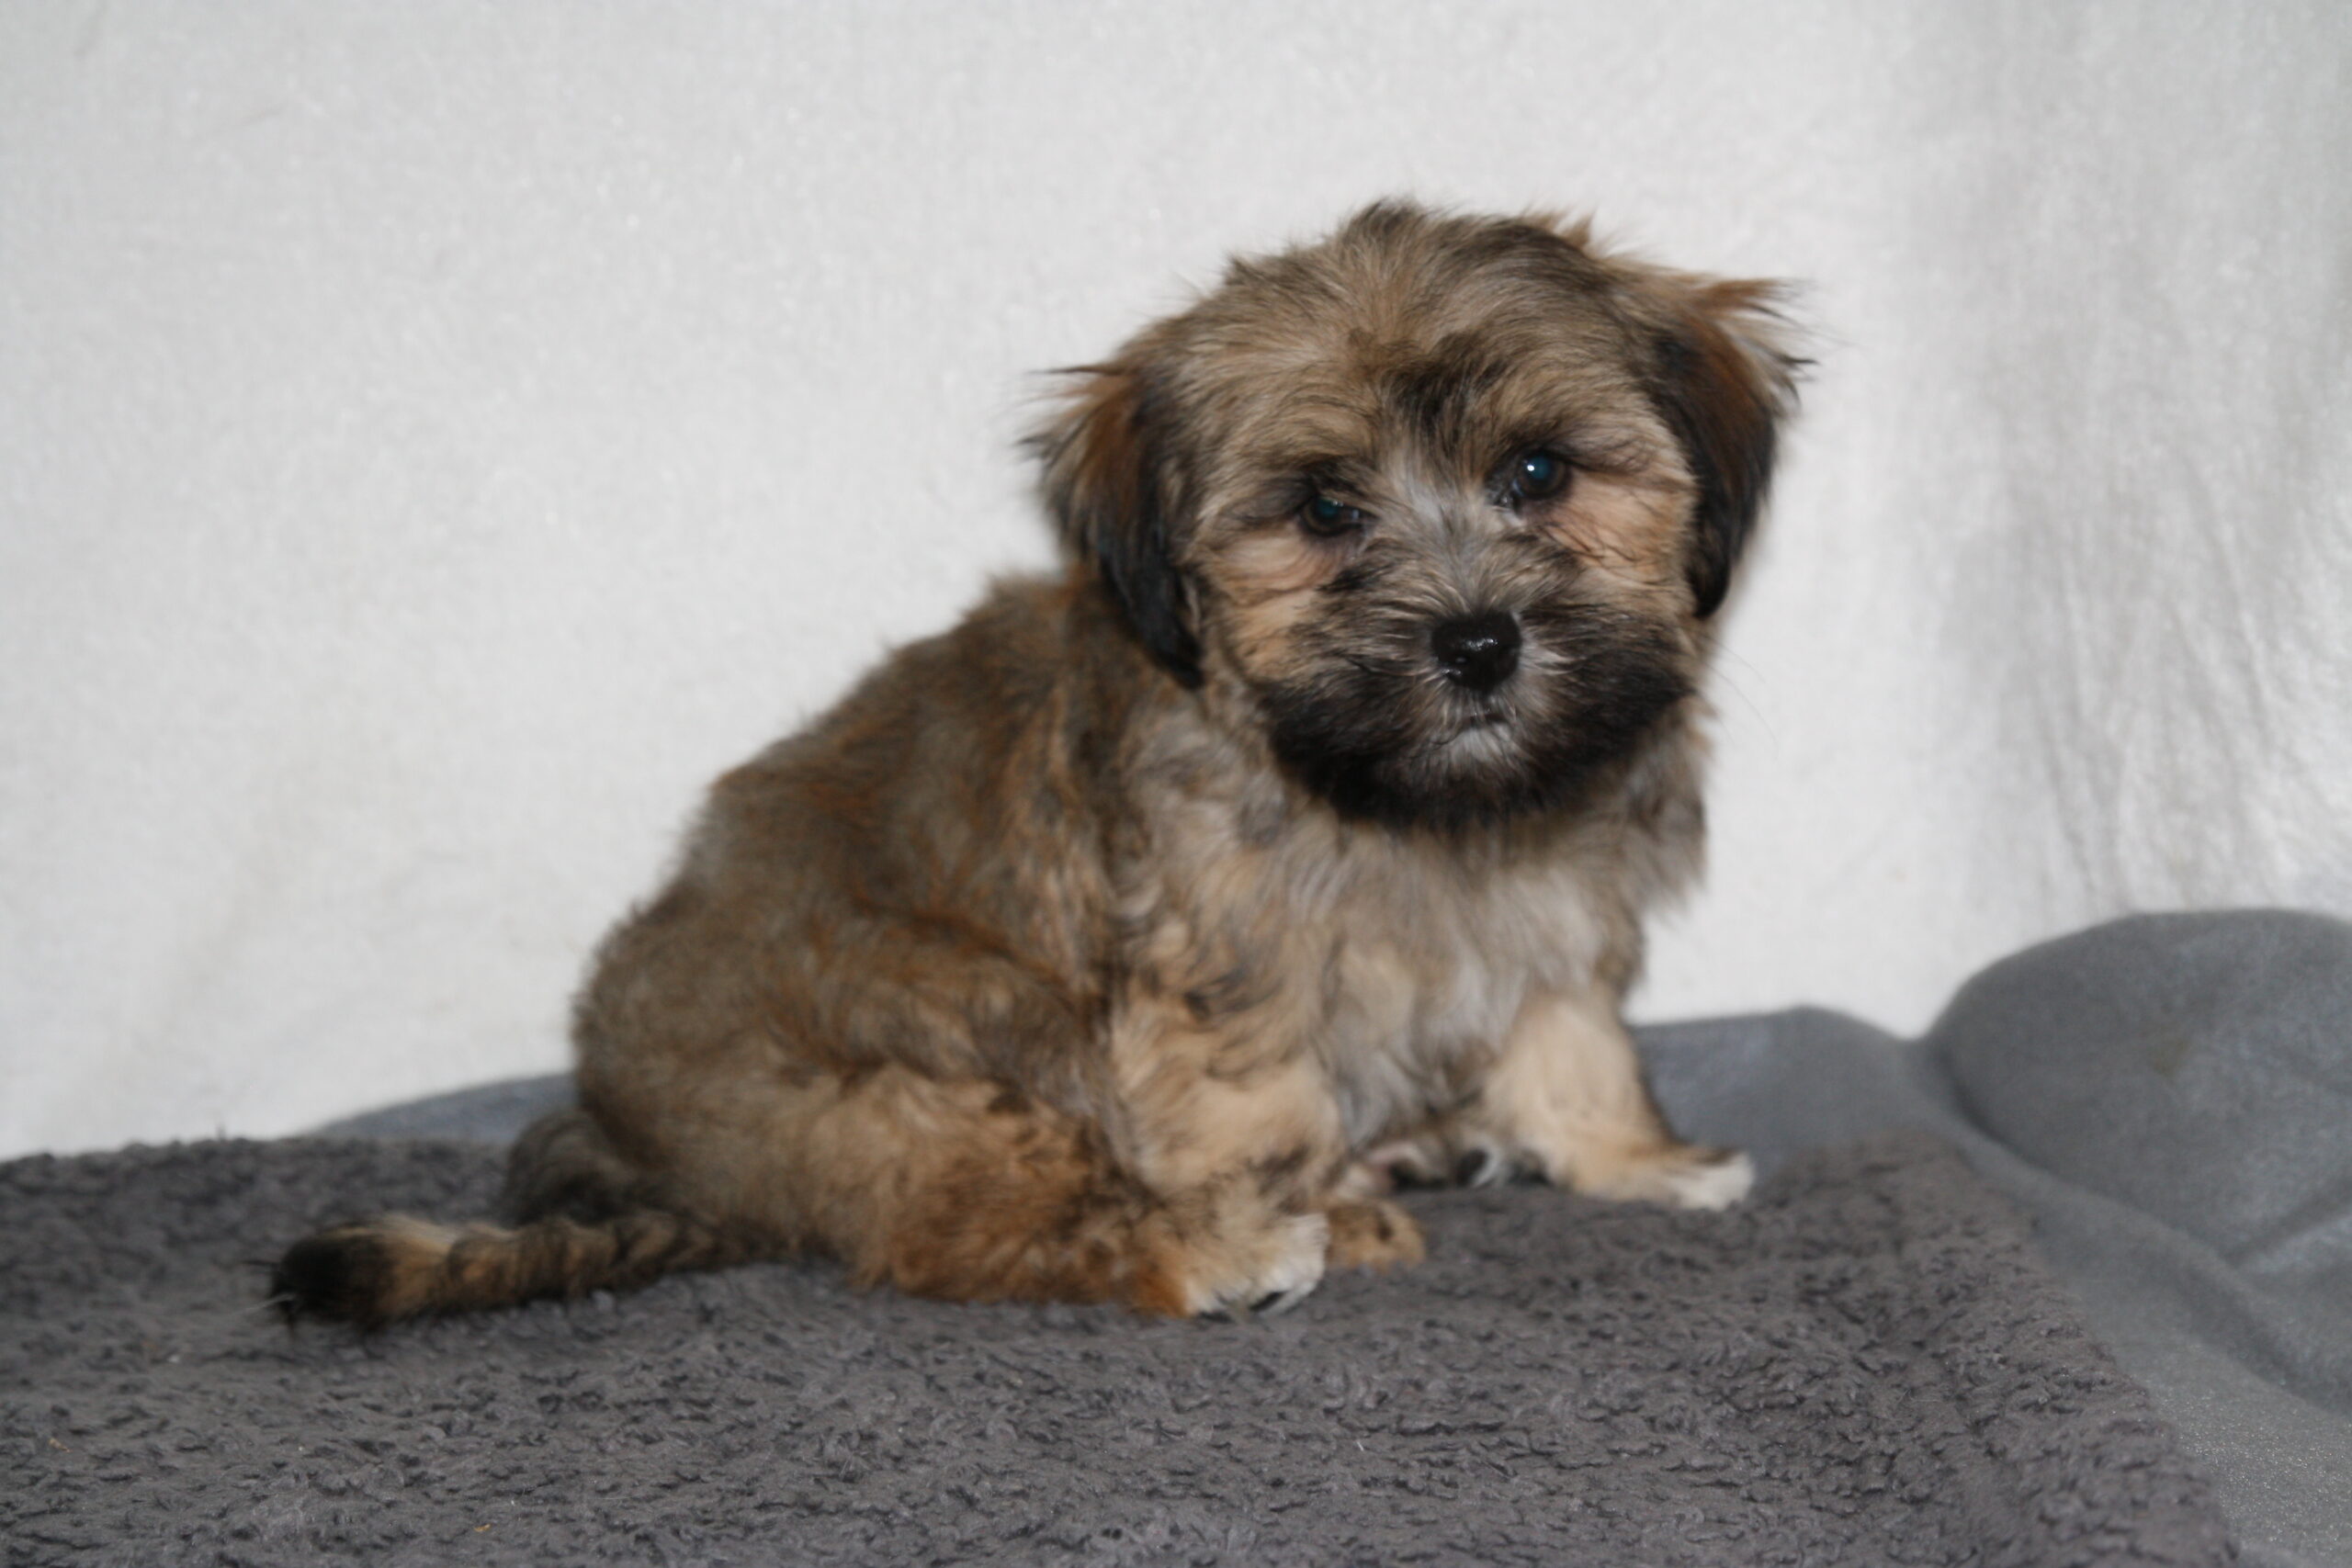 "Joey"
DOB: 5/18/2022
Breed: Havanese
Sex: Male
Availability: Ready to go home.
Price: $1000